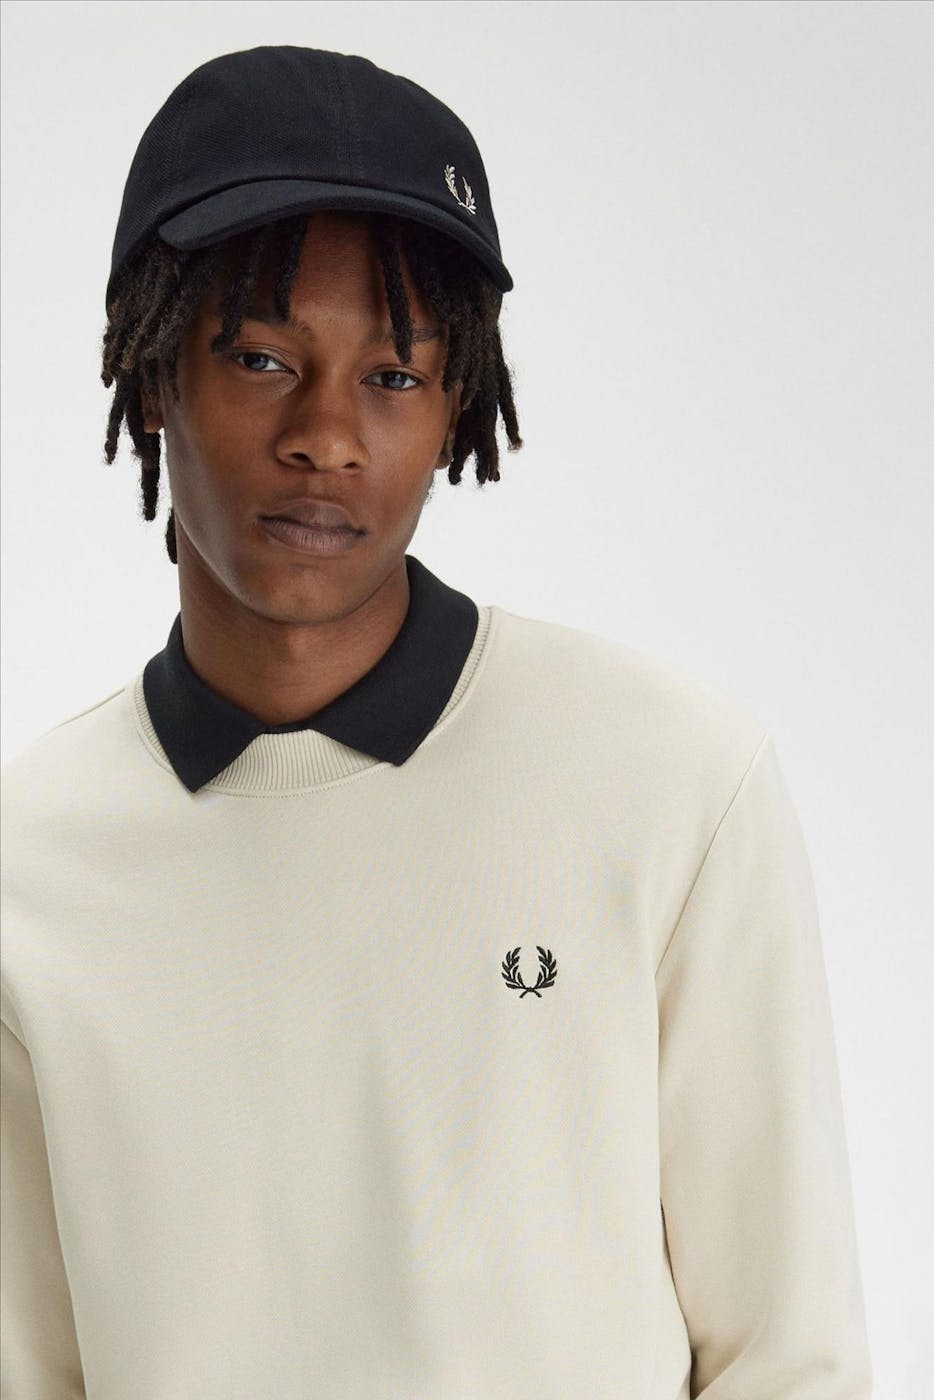 Fred Perry - Beige Crew Neck sweater